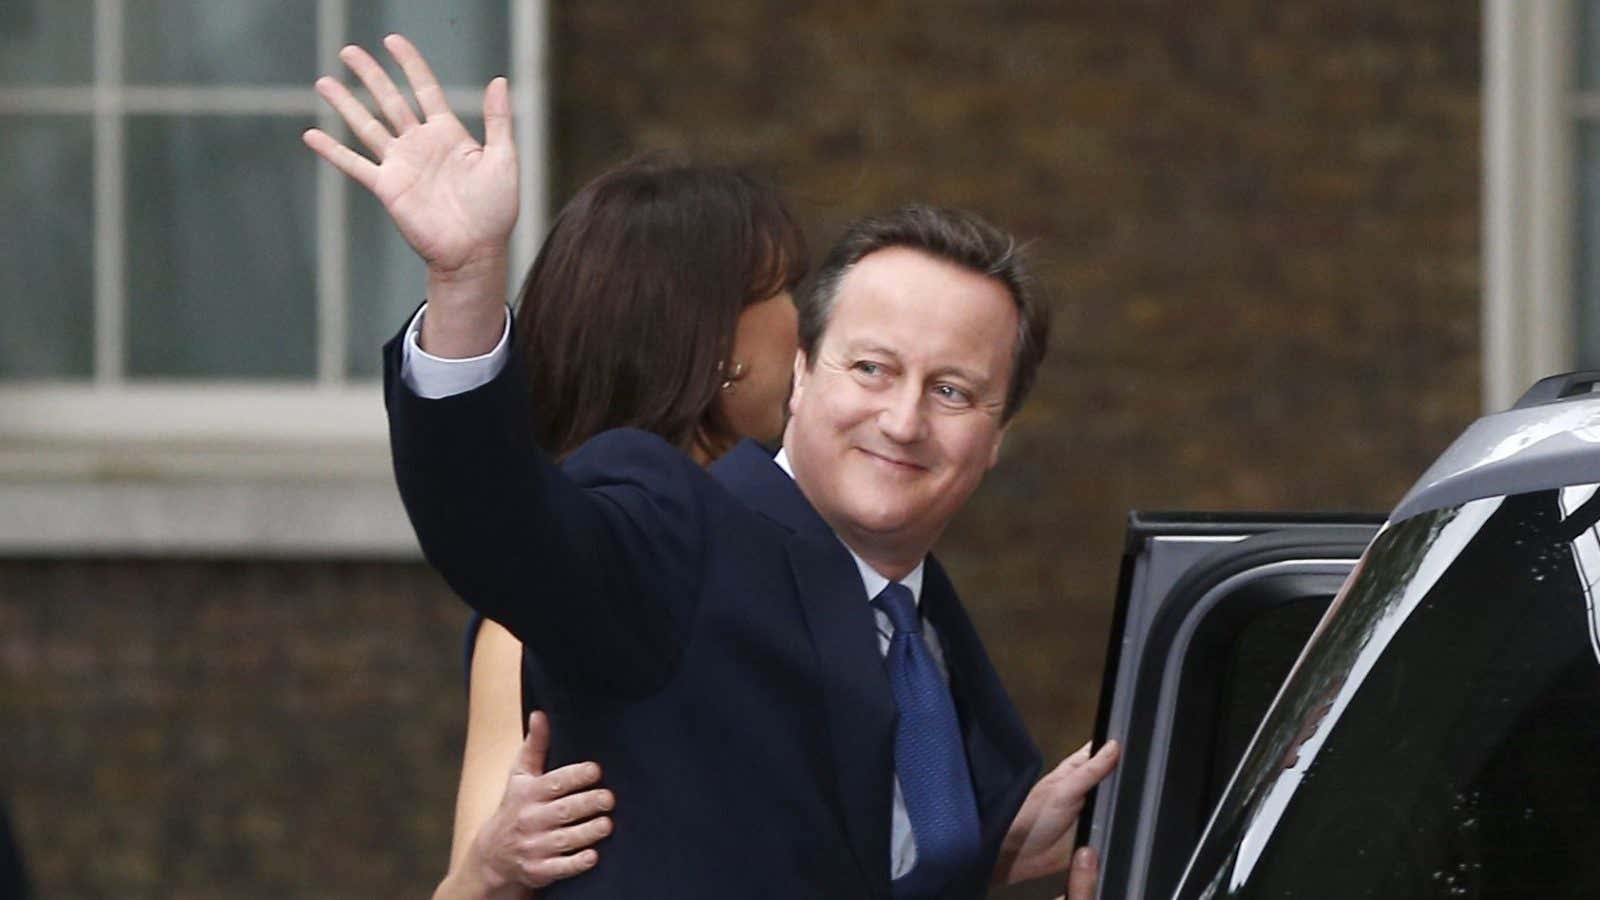 Britain’s outgoing Prime Minister, David Cameron with his wife Samantha, waves in front of number 10 Downing Street, on his last day in office as…